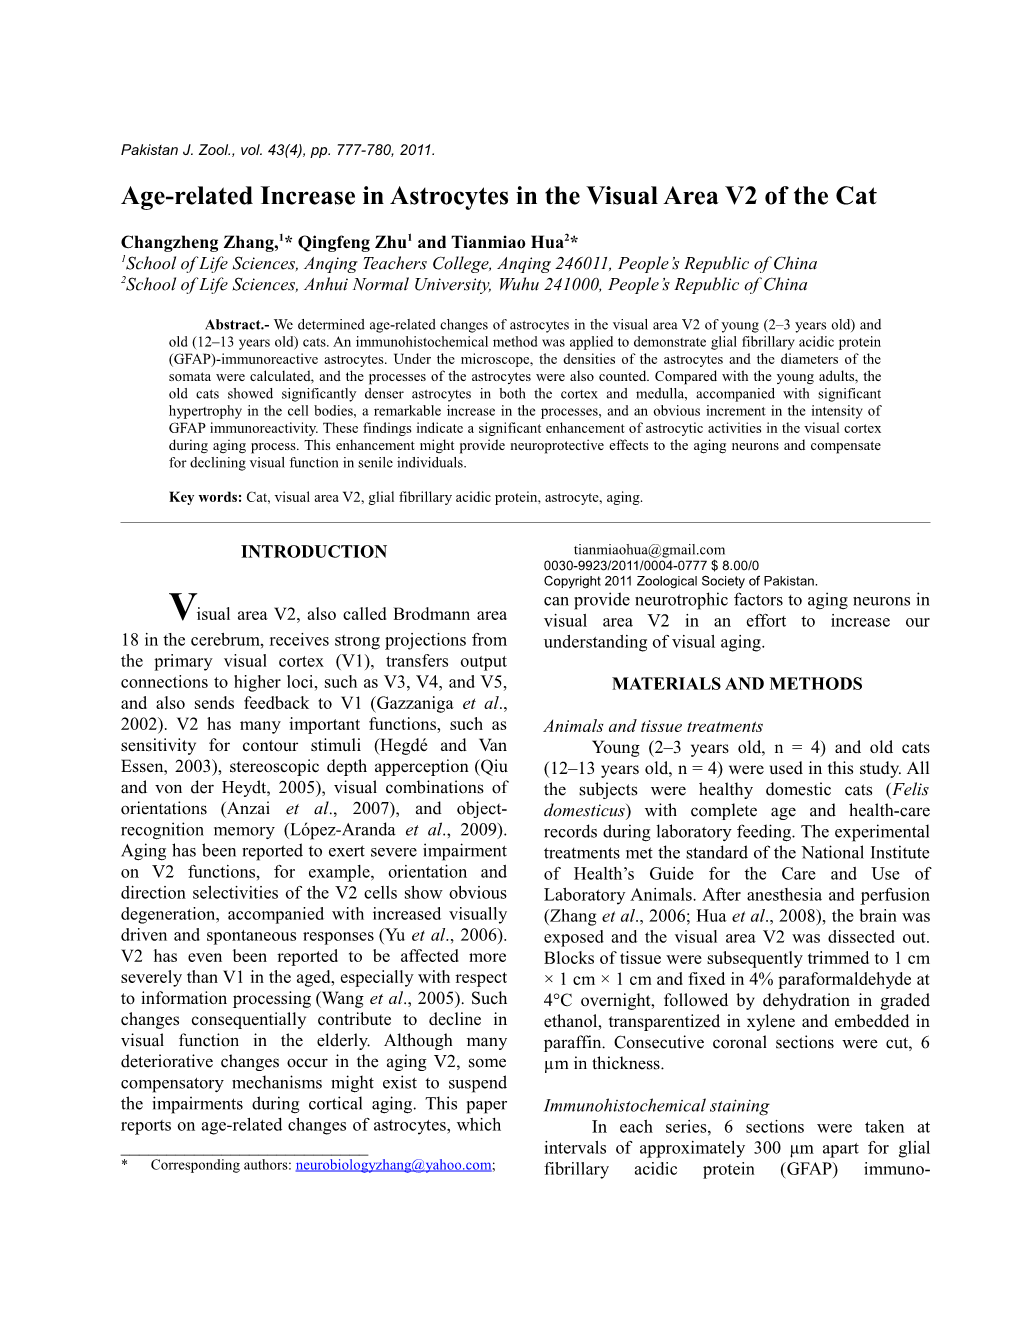 Age-Related Increase in Astrocytes in the Visual Area V2 of the Cat